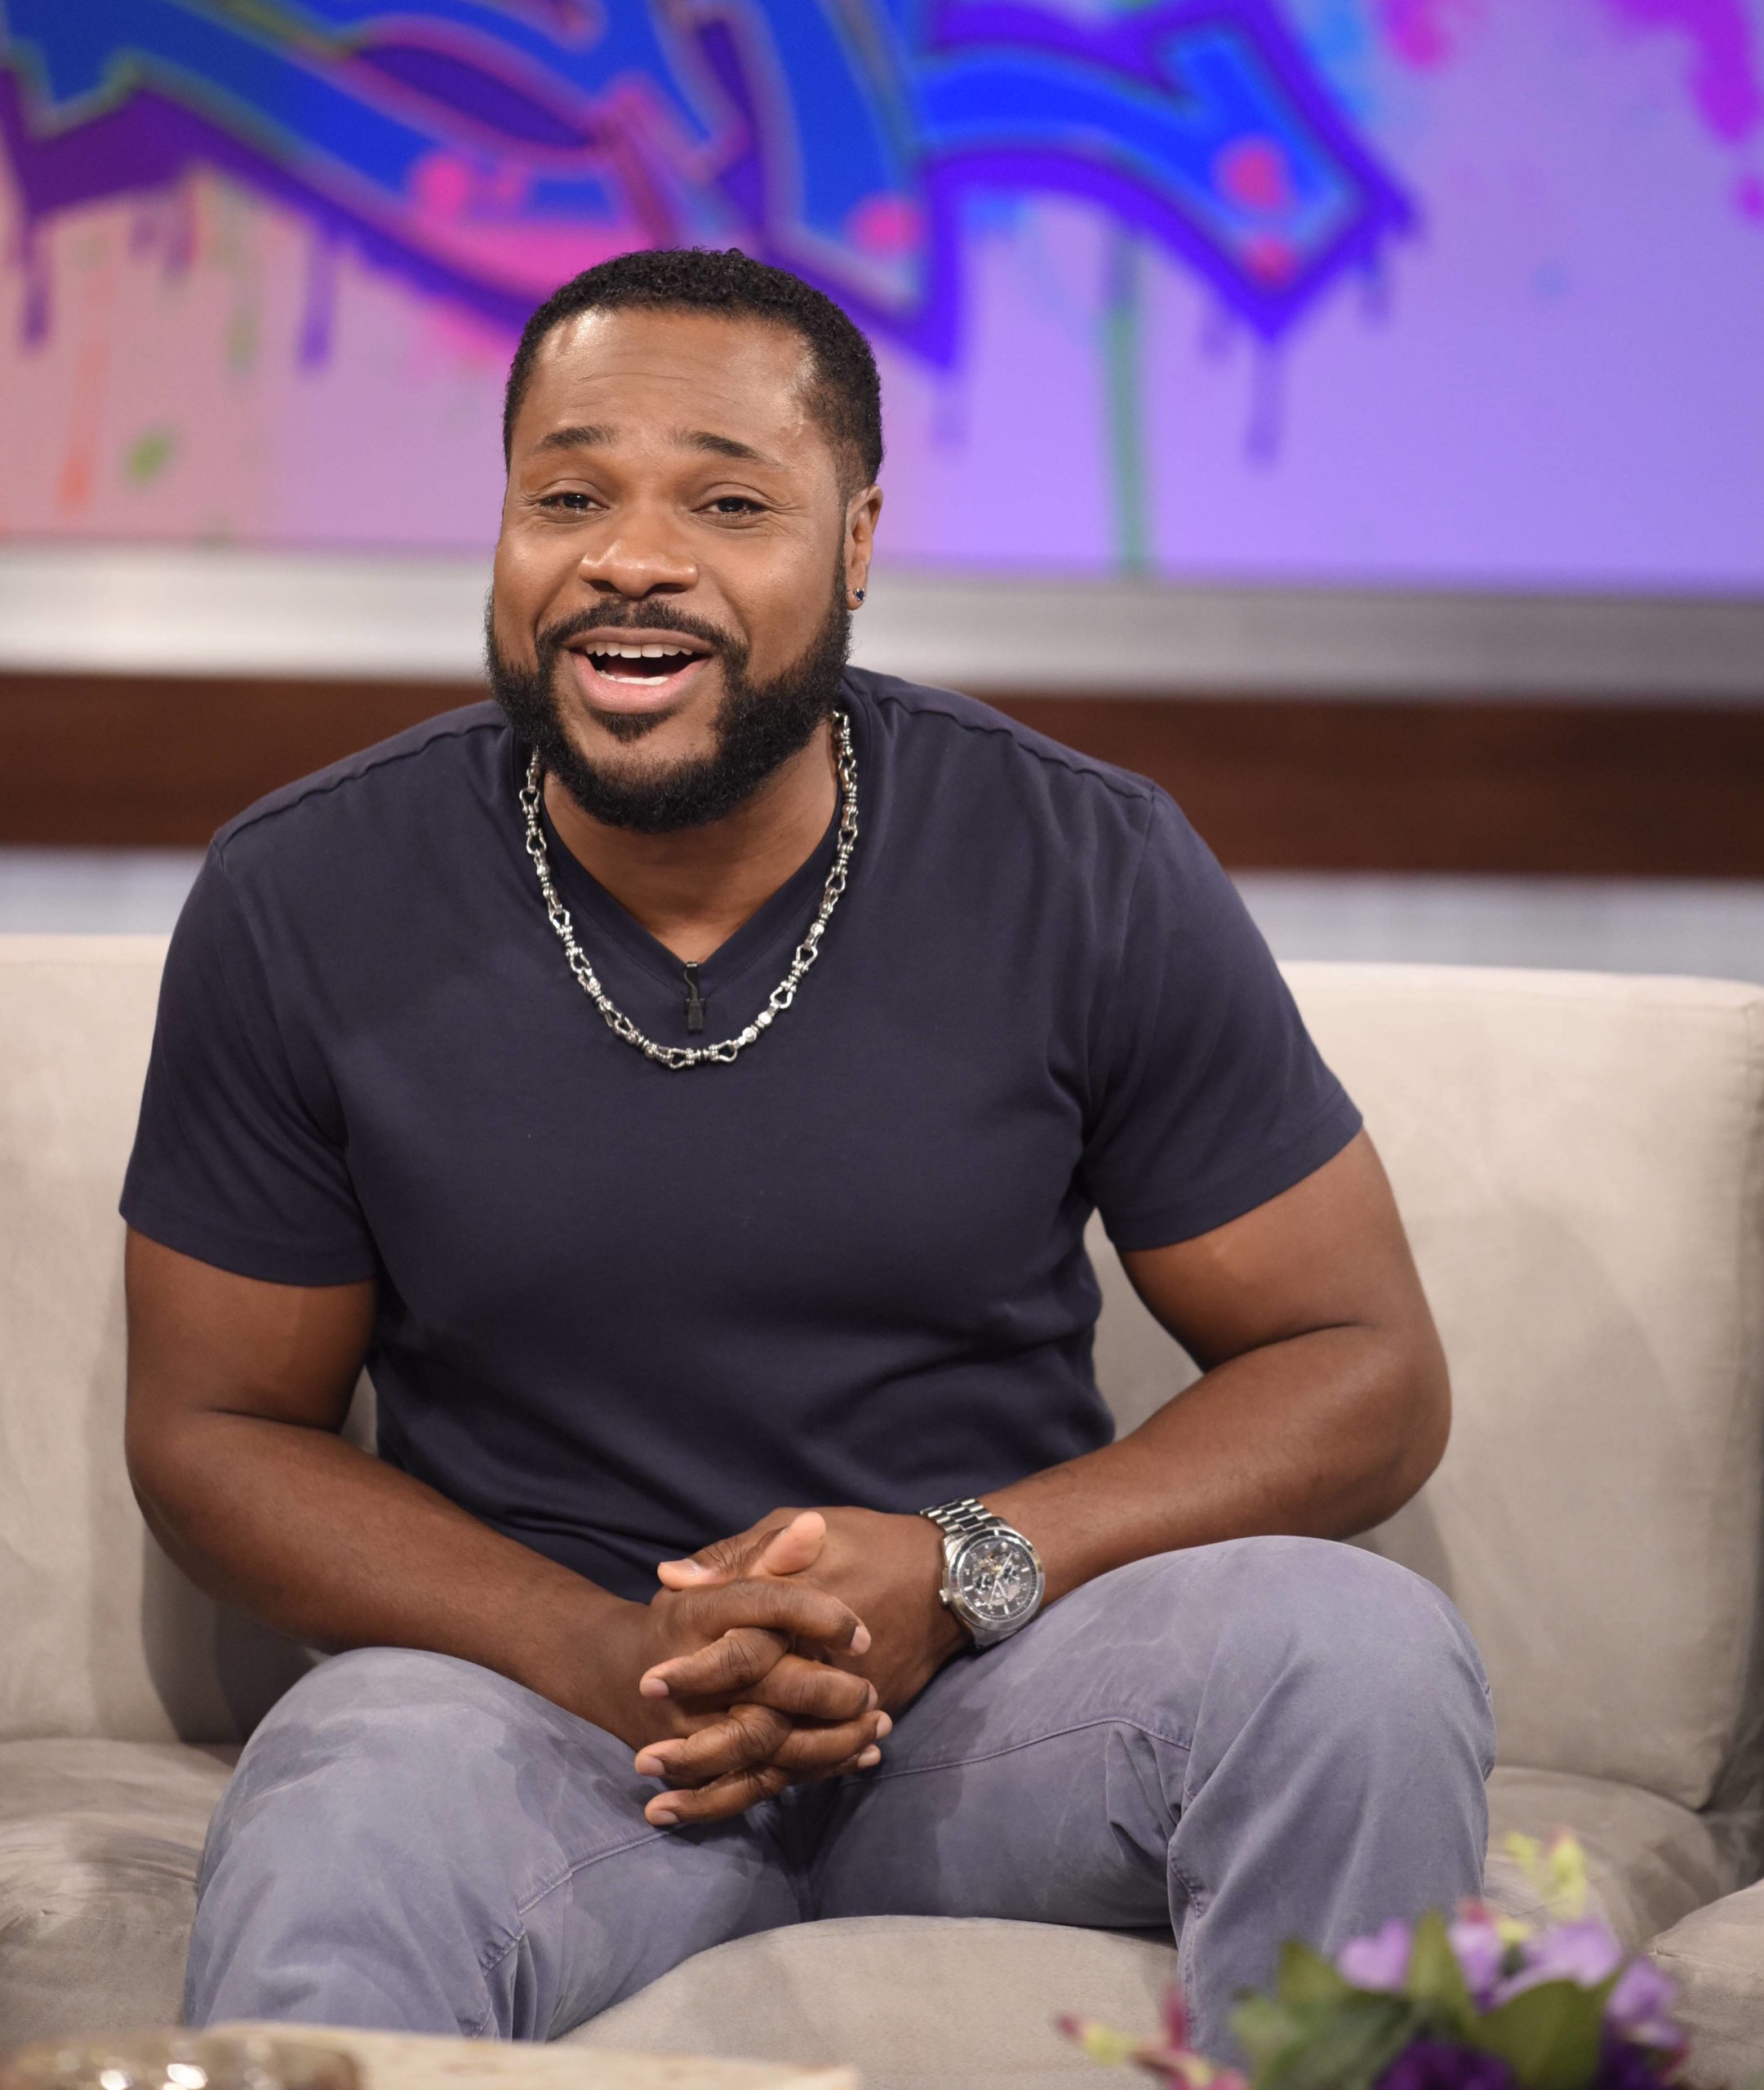 Malcolm-Jamal Warner Says Cosby Is Villainized, While Woody Allen, Others G...